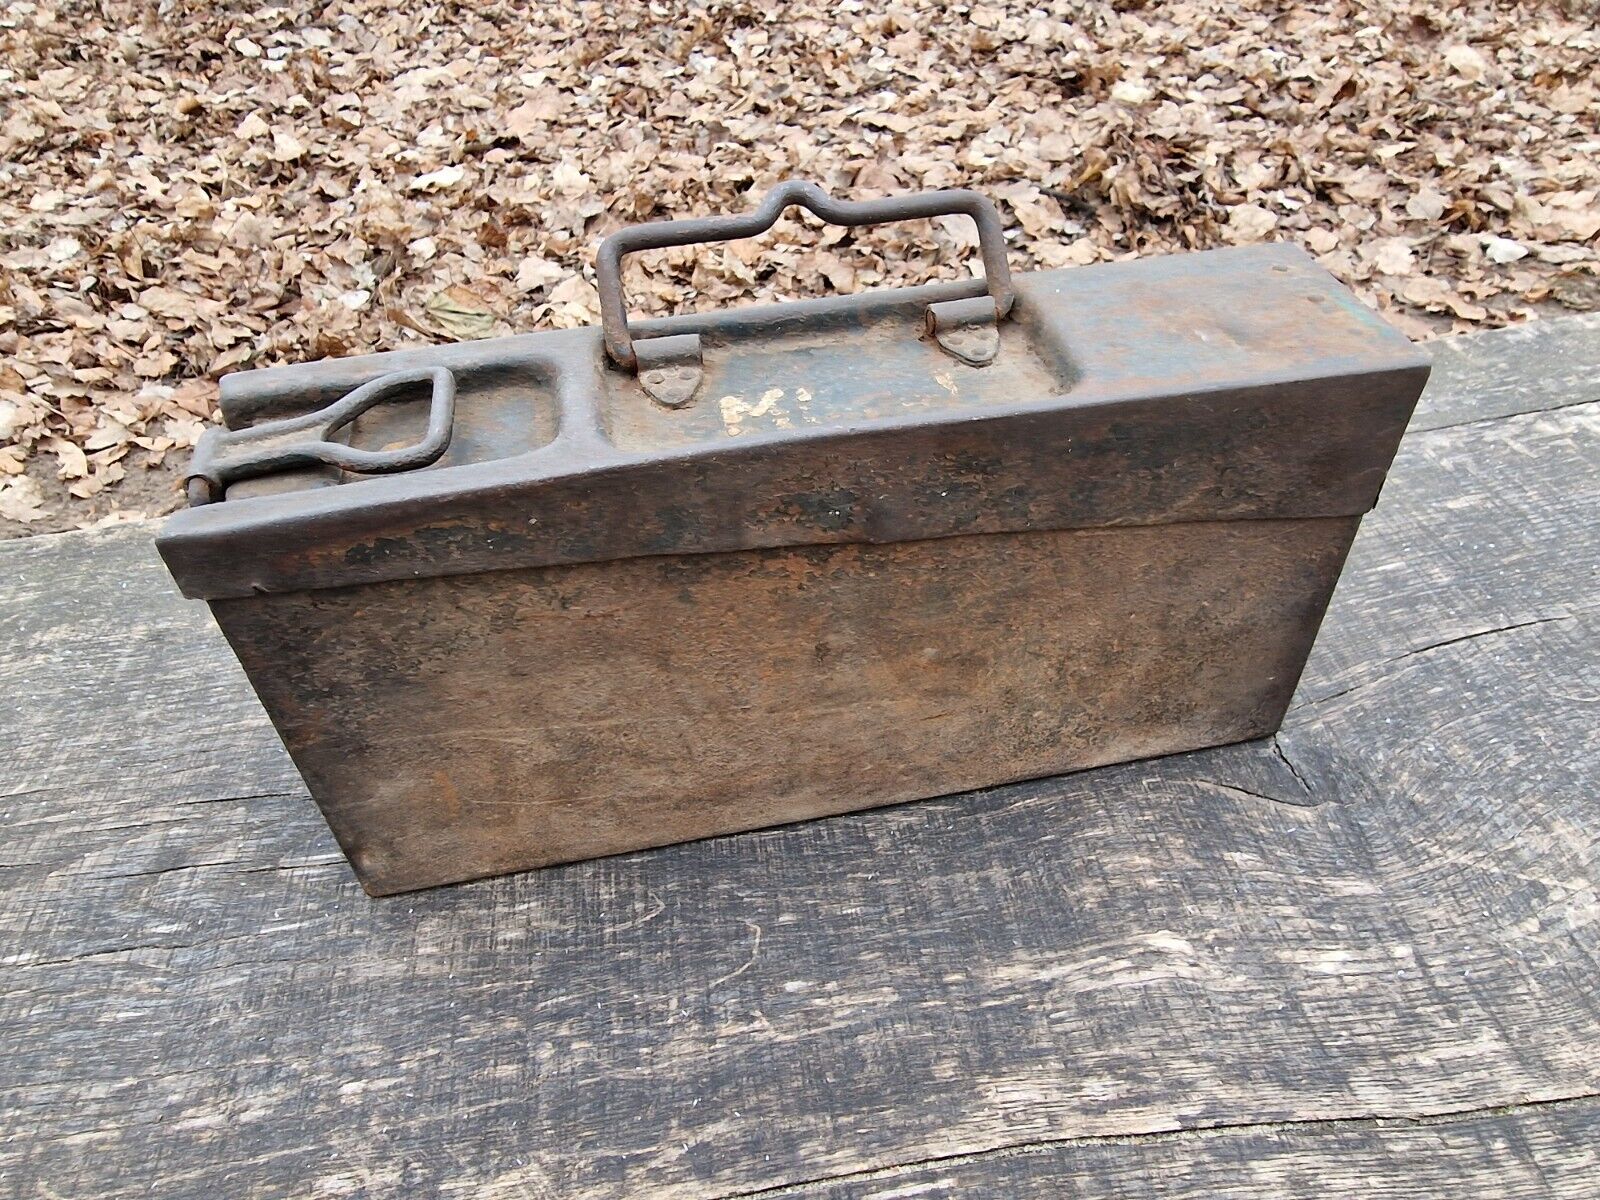 WW2 Accessories MG Box from the German bunker relic.